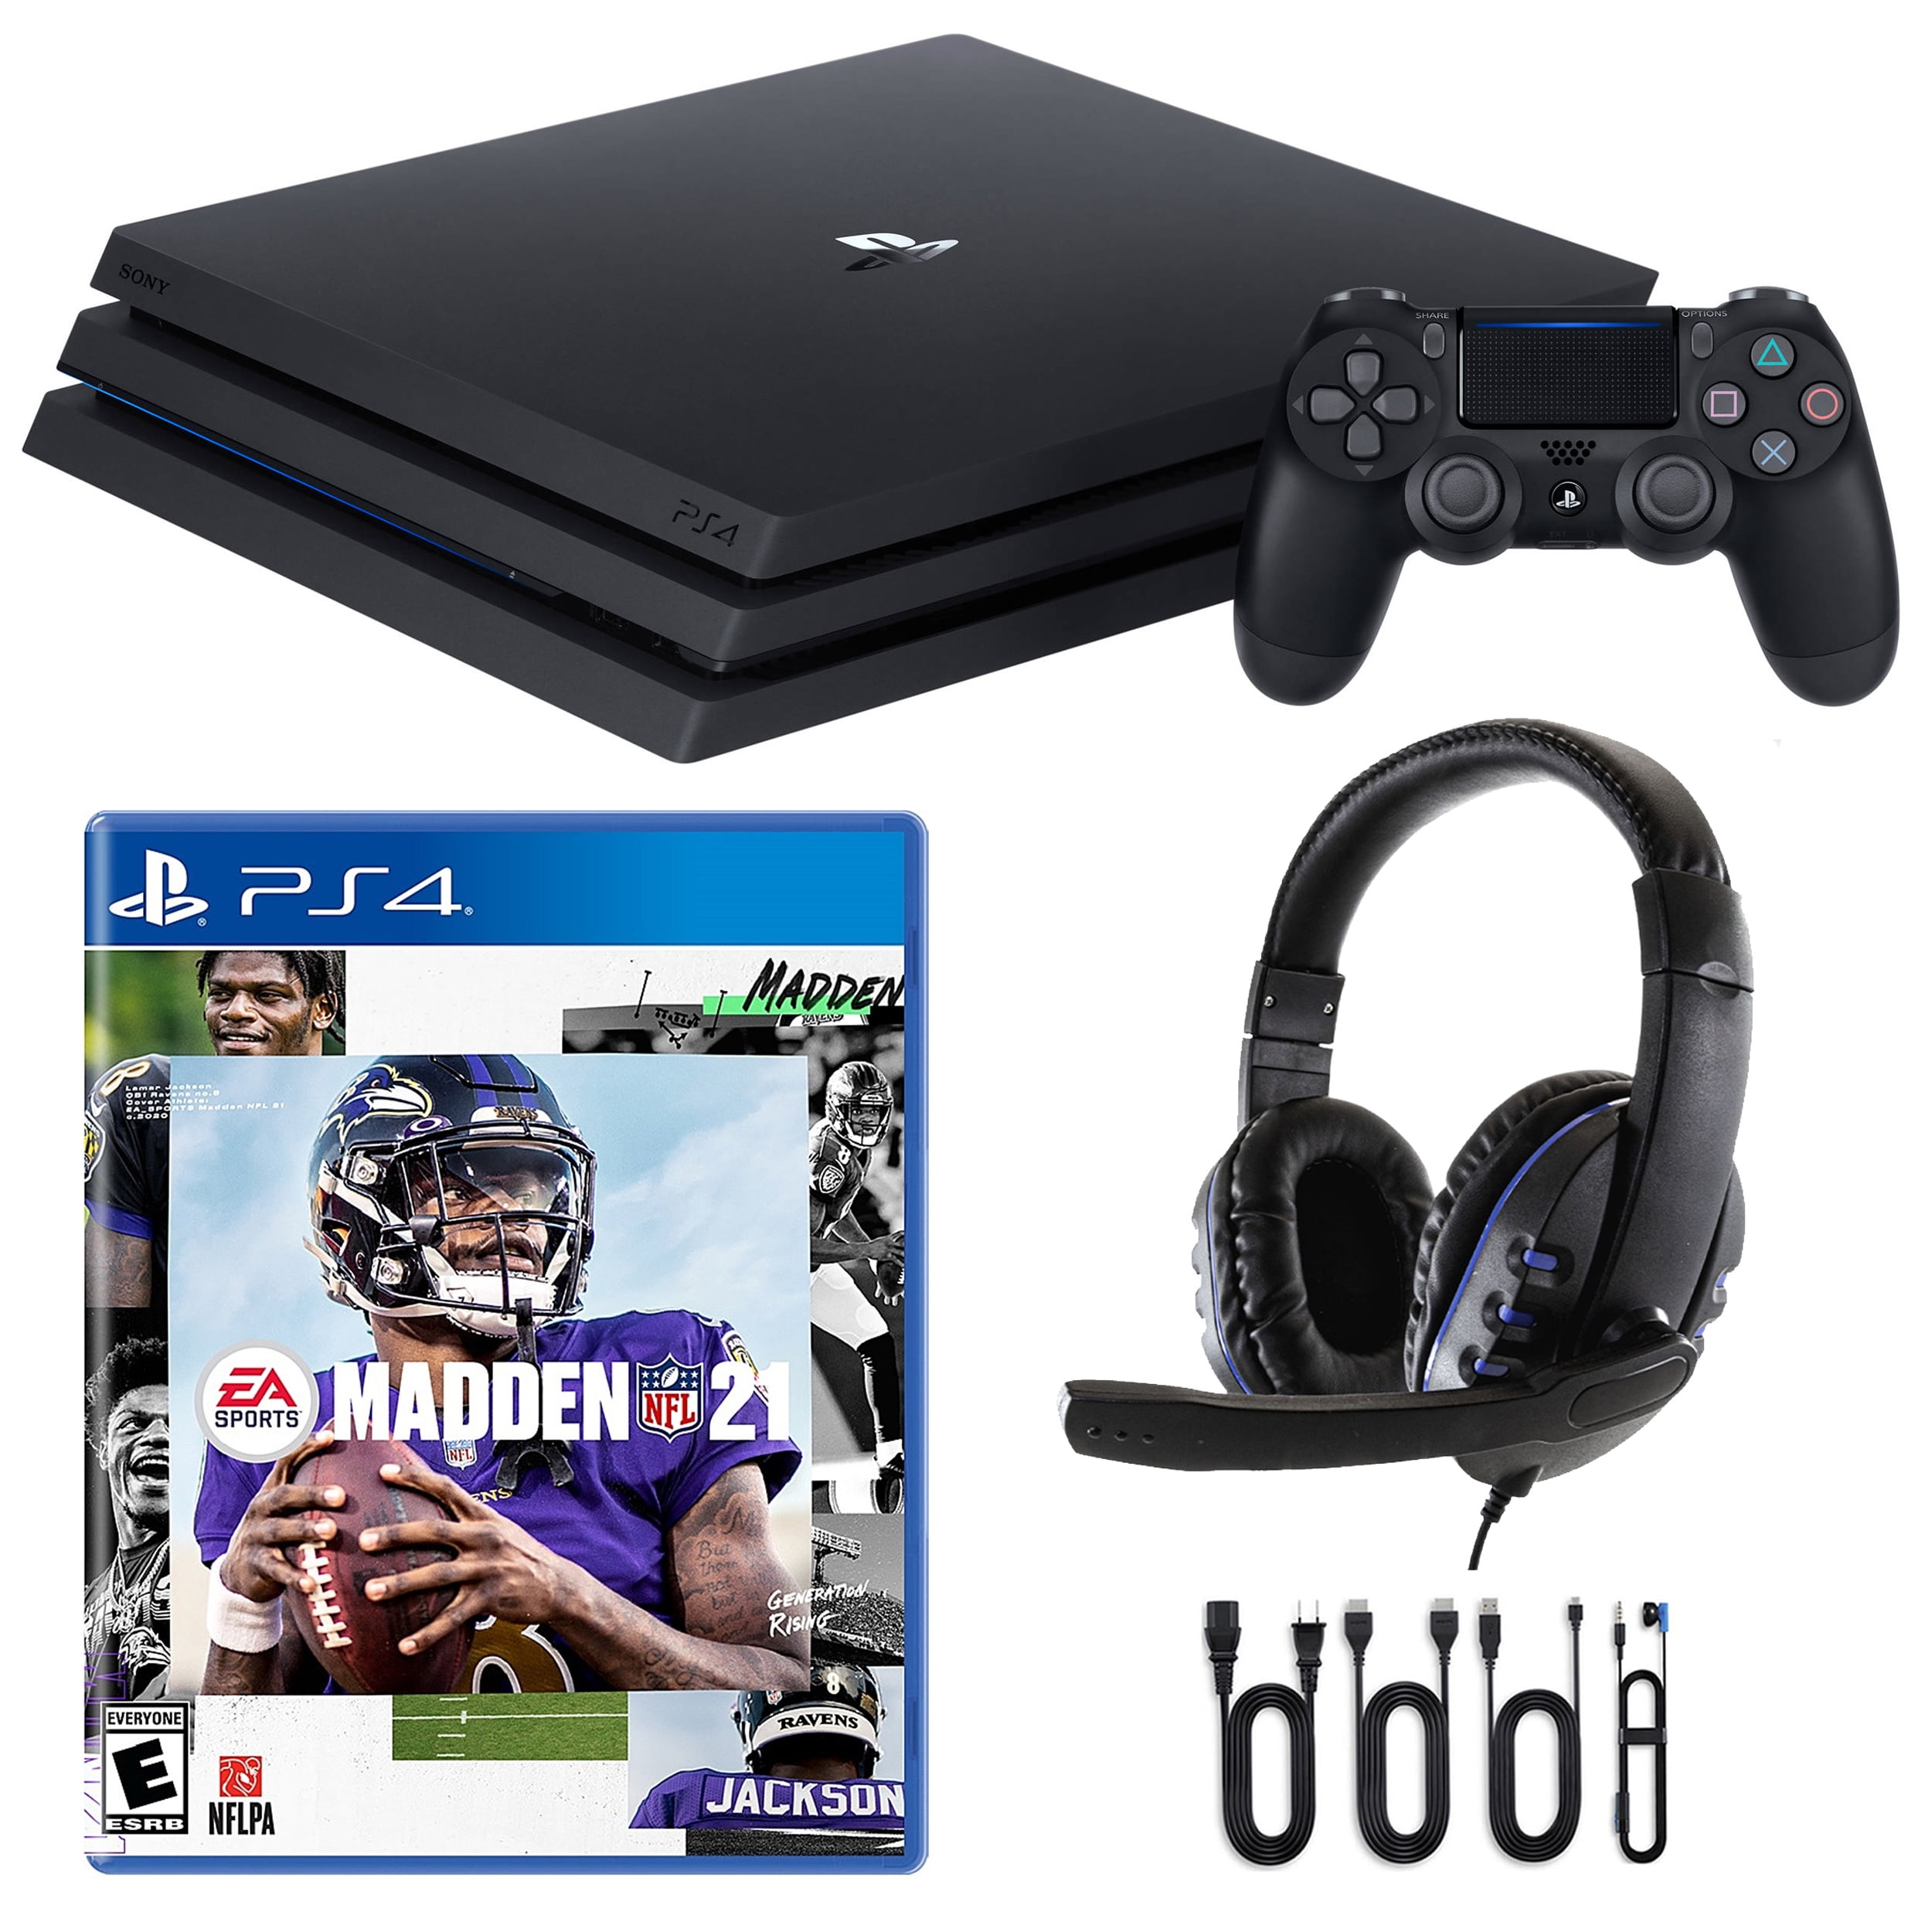 PlayStation 4 Pro 1TB Console with Madden 21 and Headset - Walmart.com